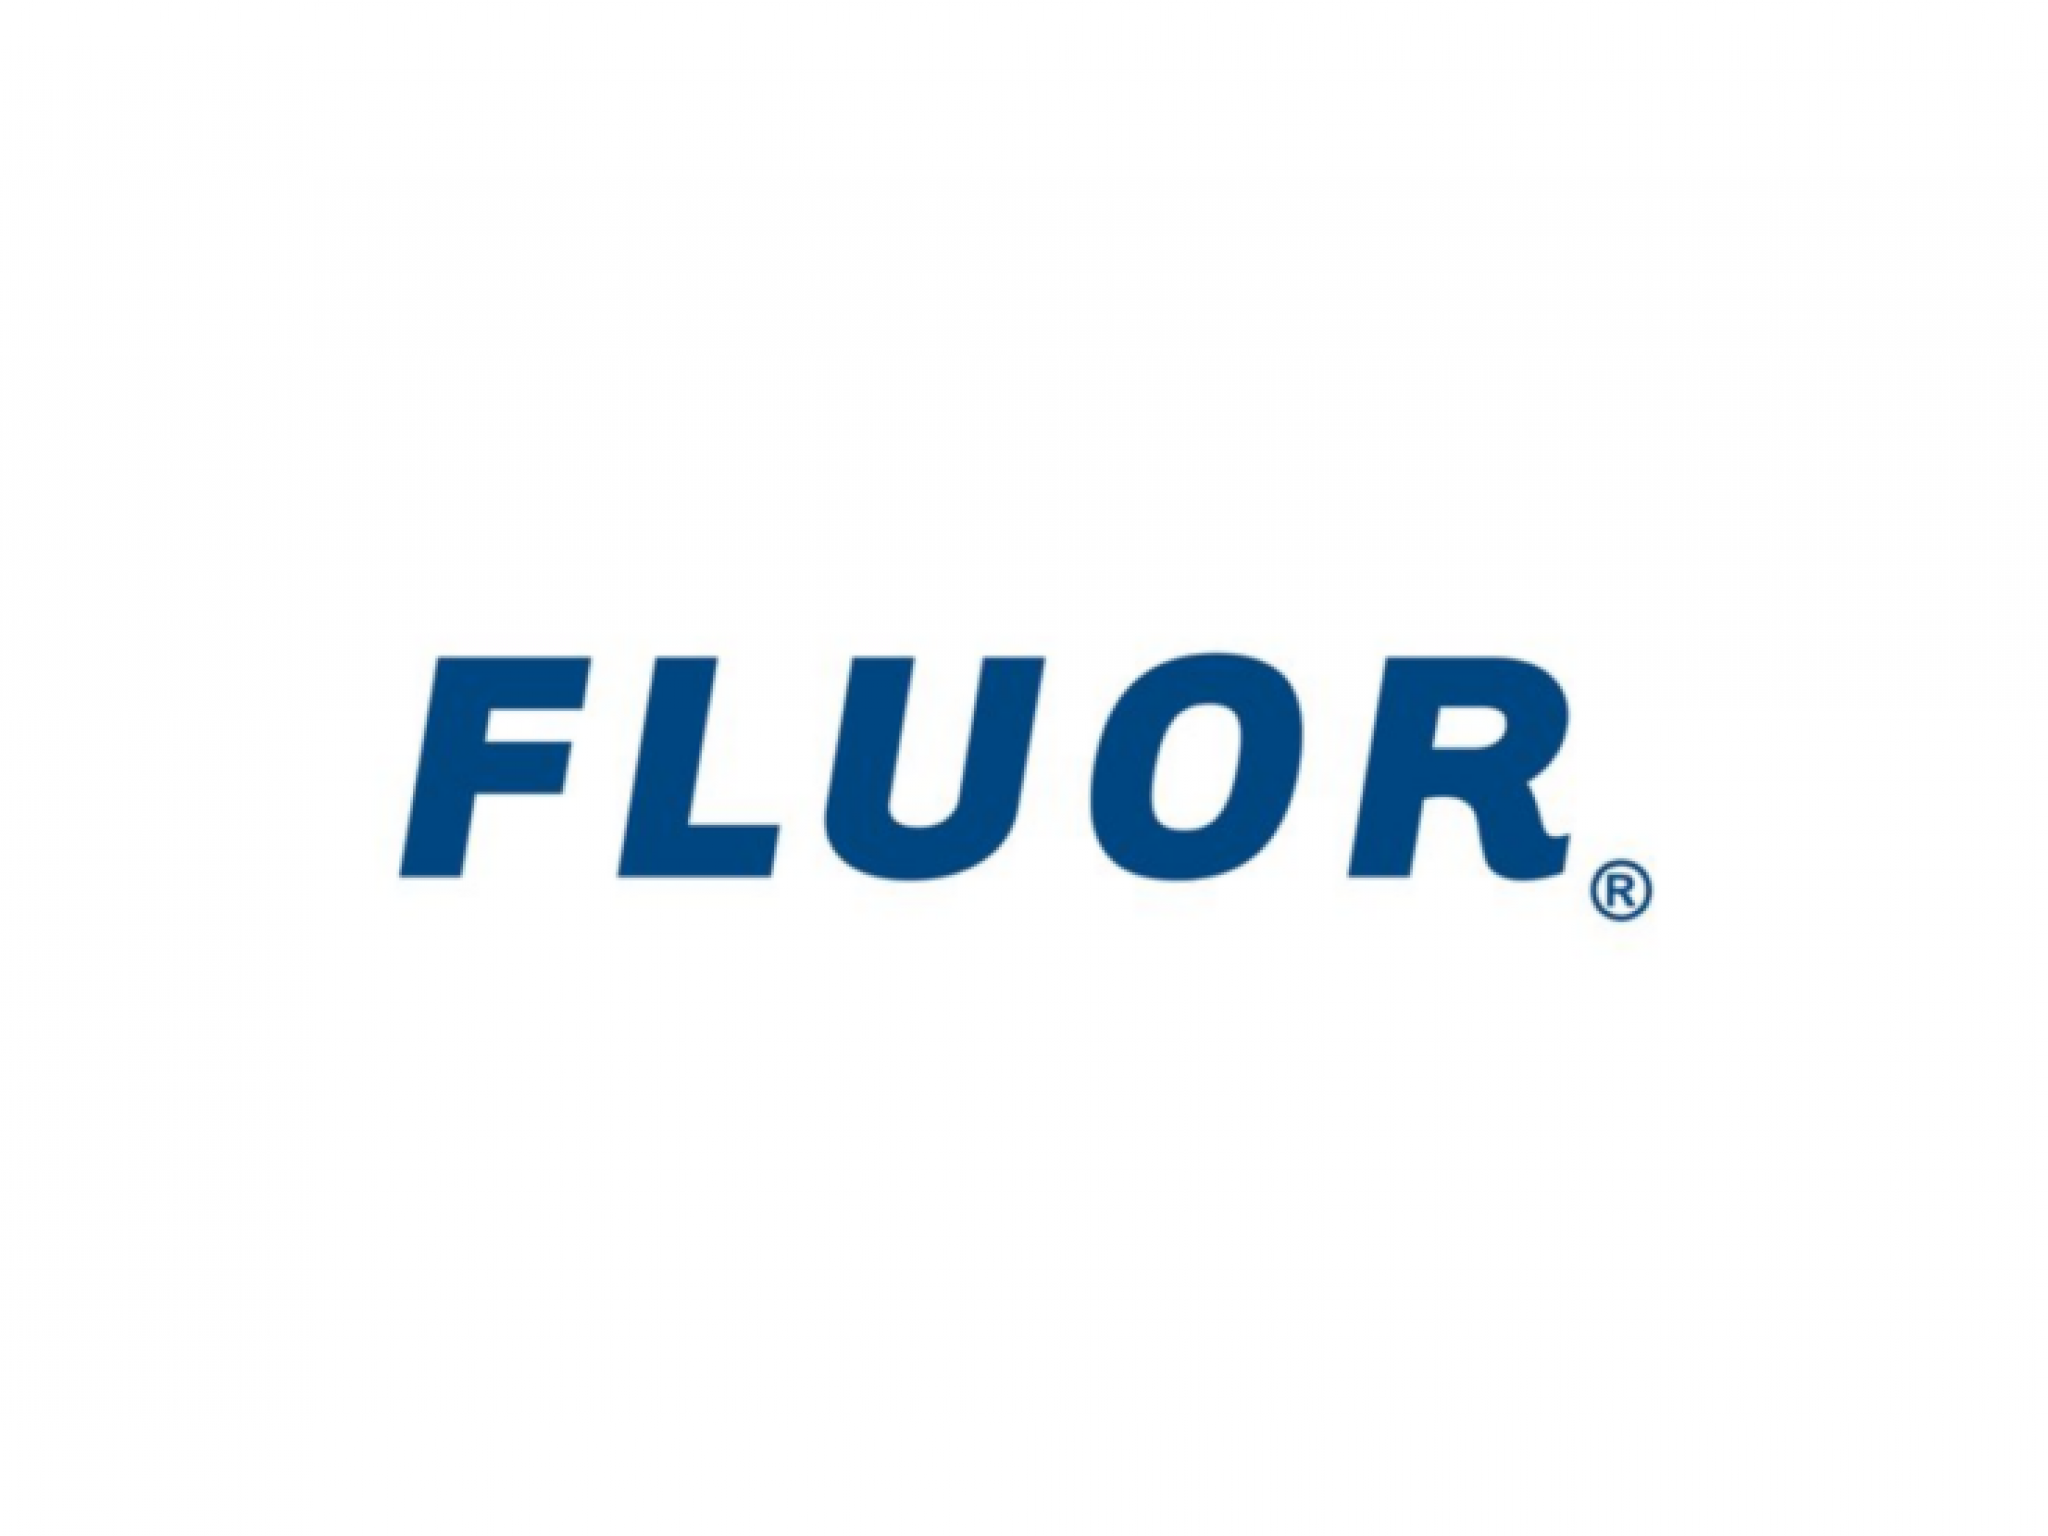  why-is-engineering-and-construction-company-fluor-stock-trading-lower-today 